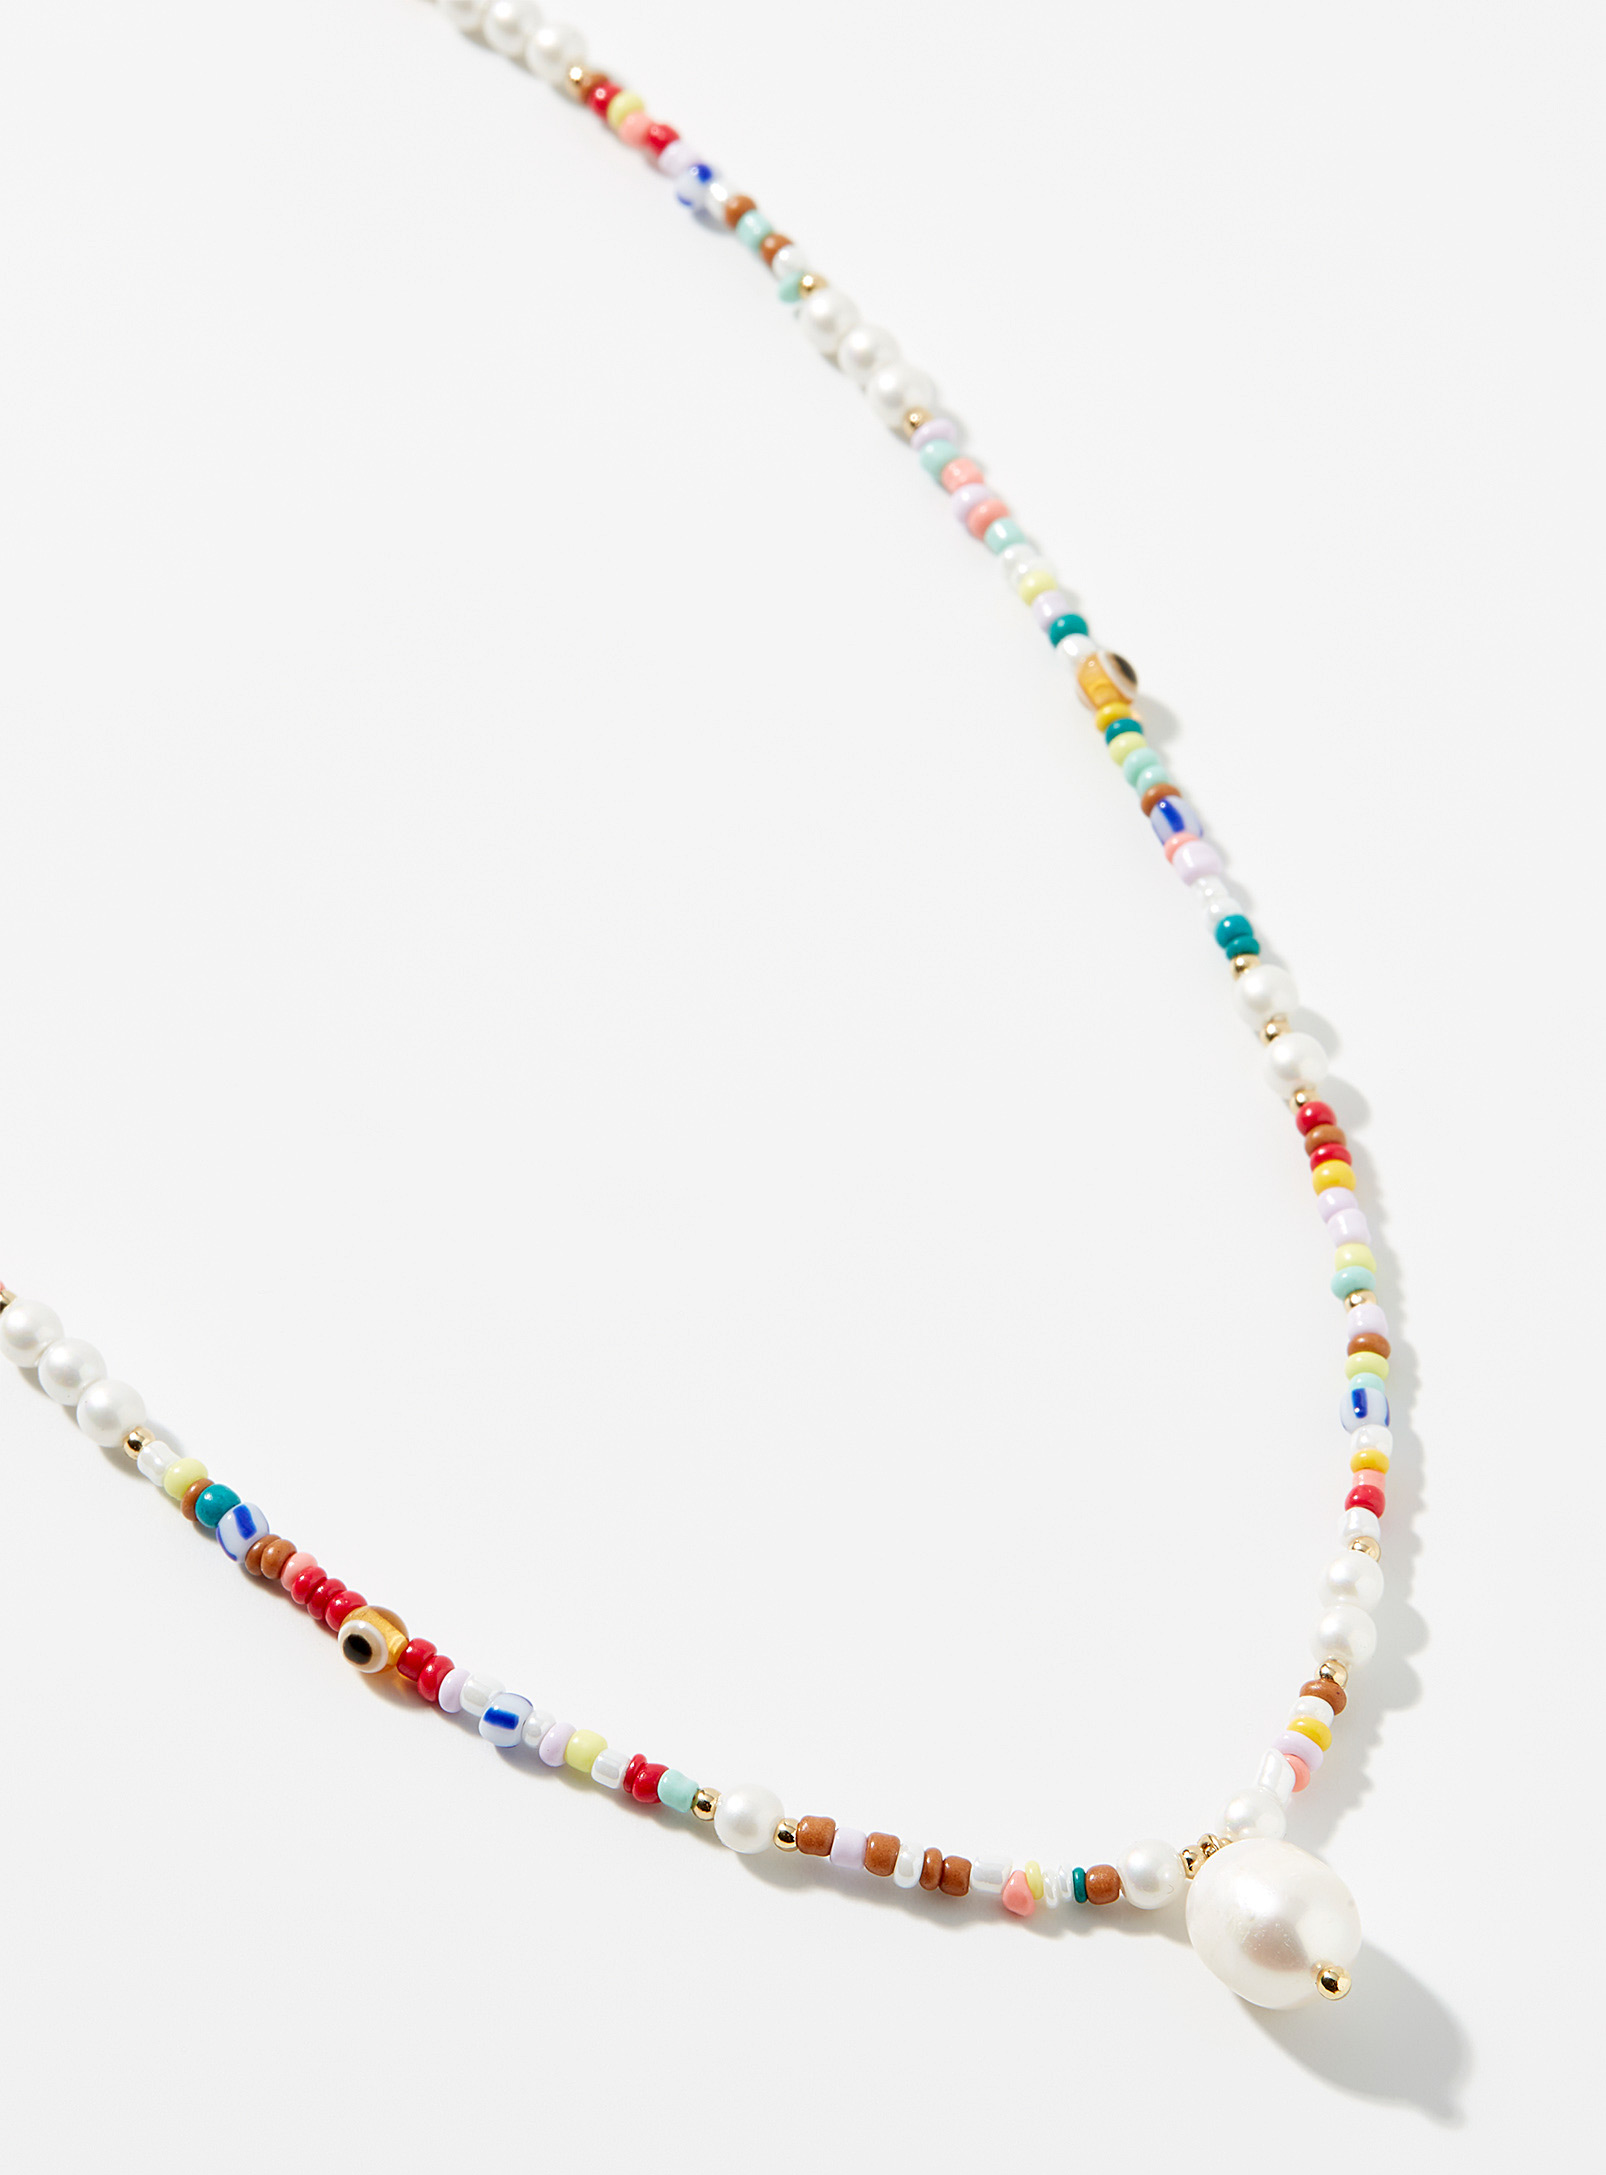 Simons - Women's Whimsical necklace